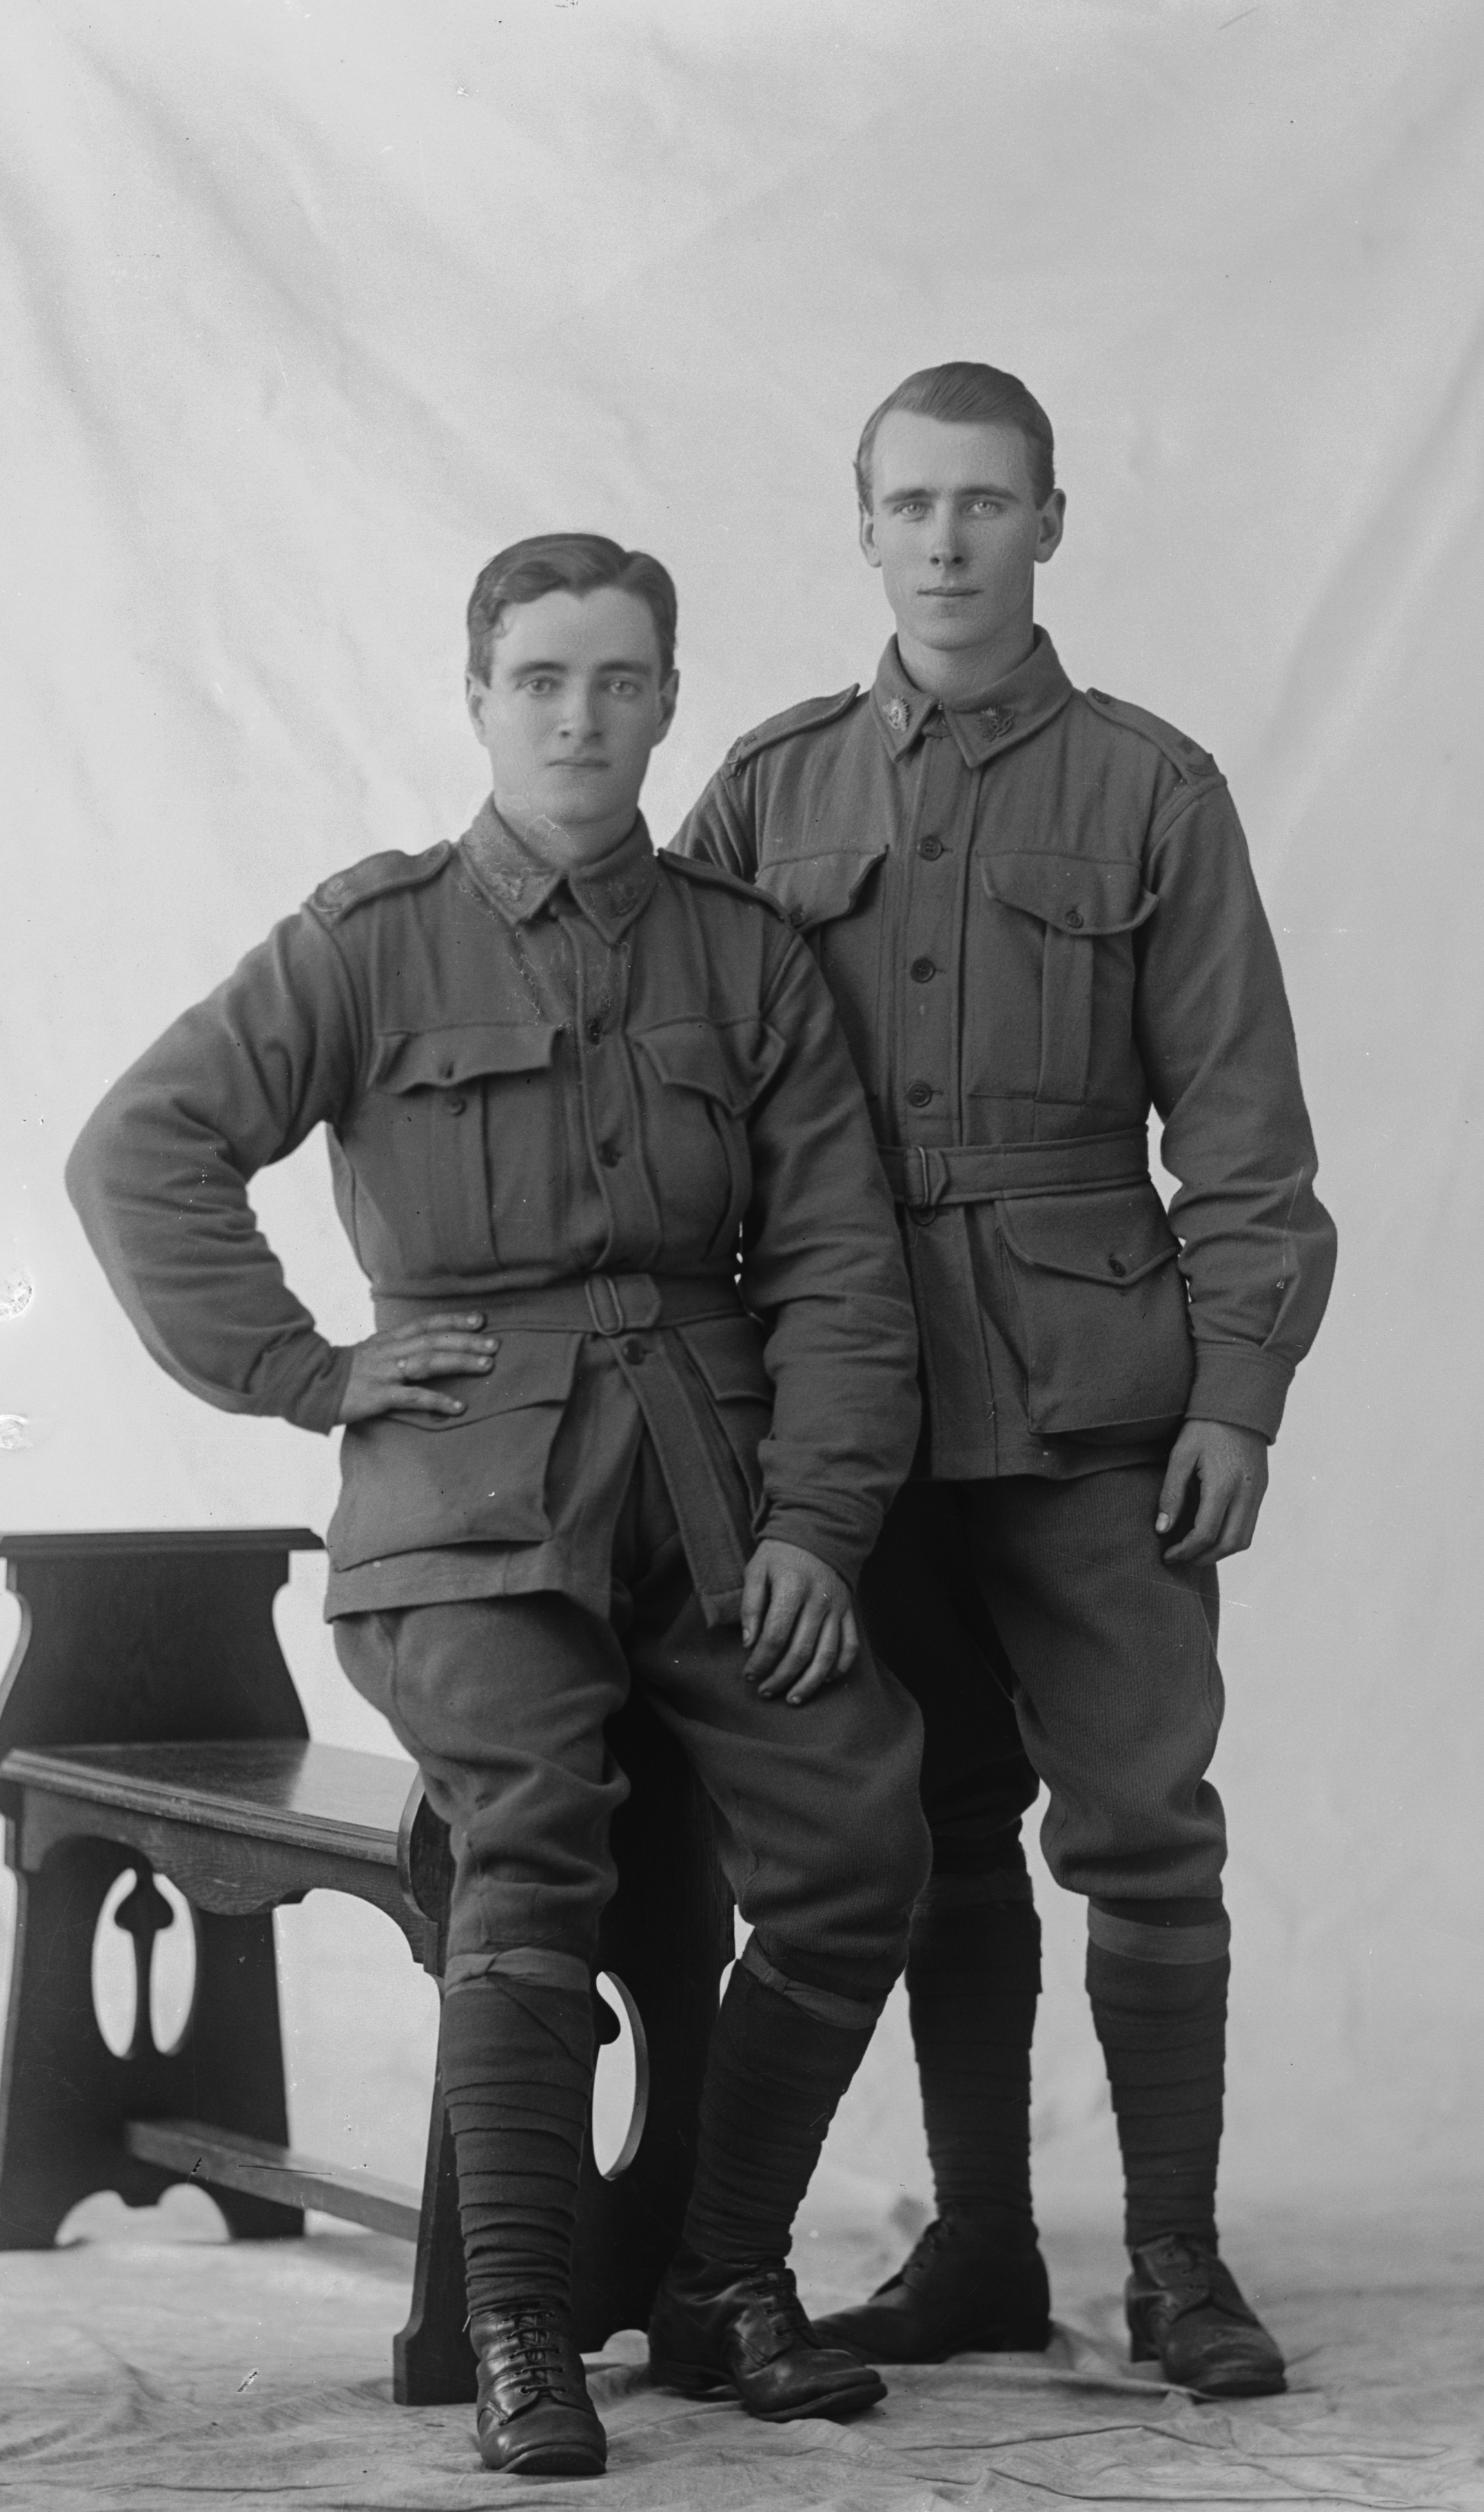 Photographed at the Dease Studio, 117 Barrack Street Perth WA Image courtesy of the State Library of Western Australia: 108181PD. Photographed with Private Henry Watkins Roberts, standing.